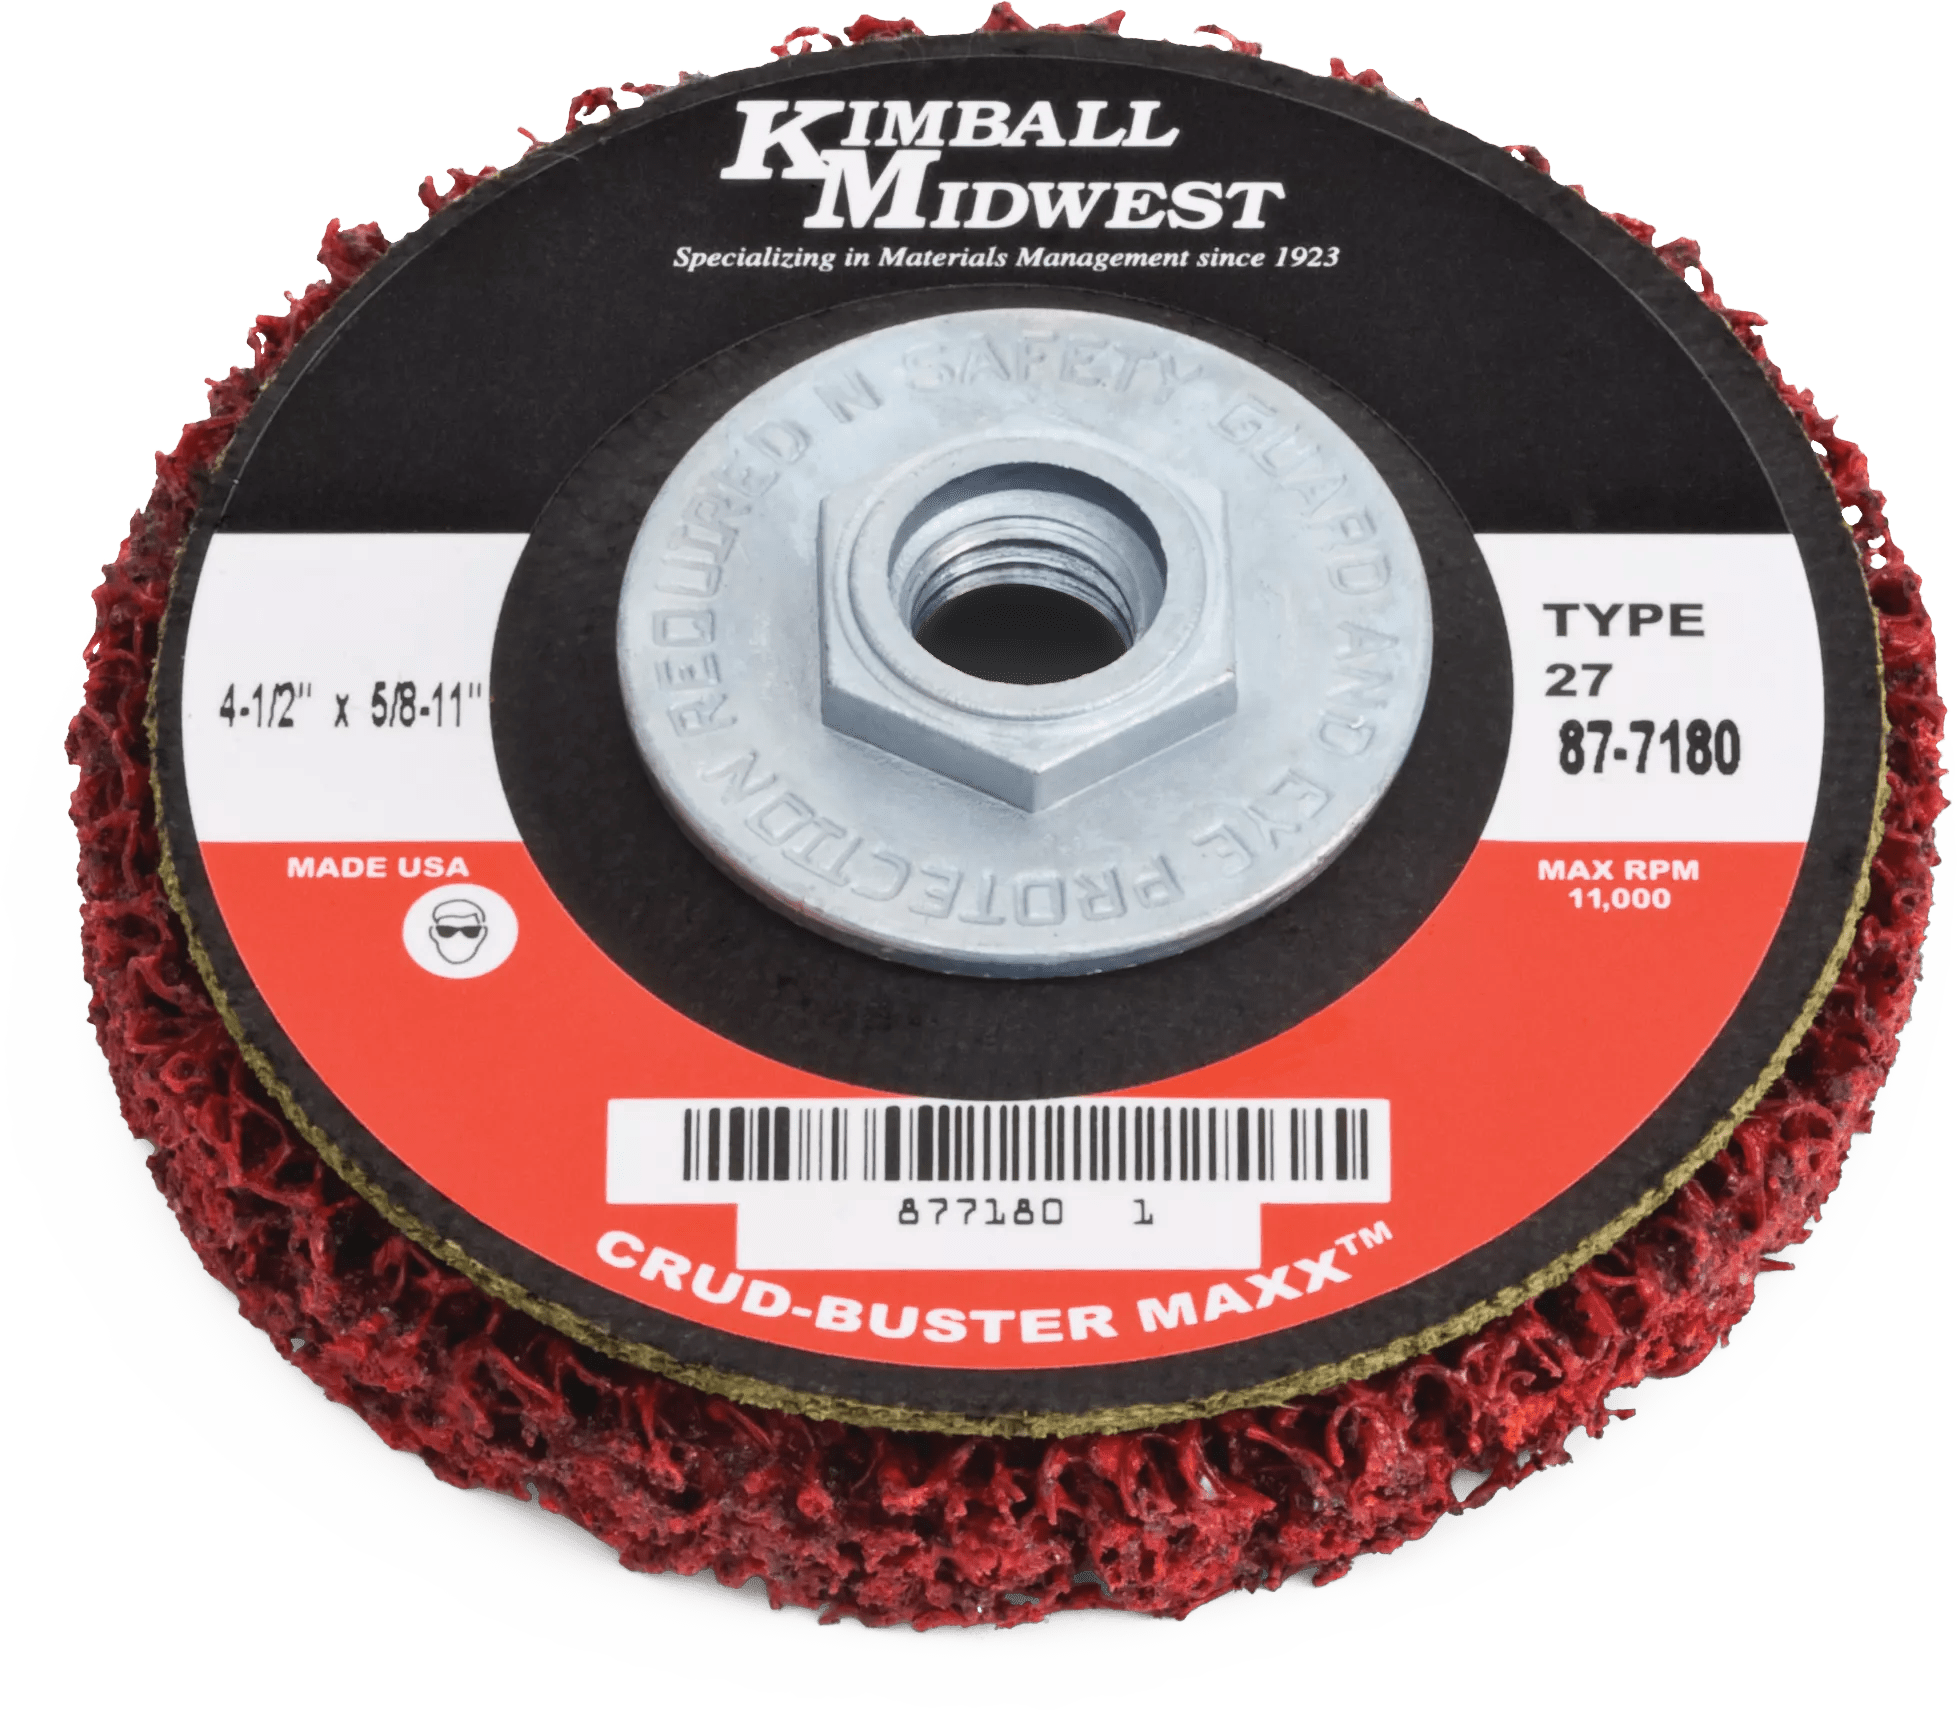 4-1/2" x 5/8"-11 Red Type 27 Crud-Buster Maxx Silicone Carbide Stripping Disc